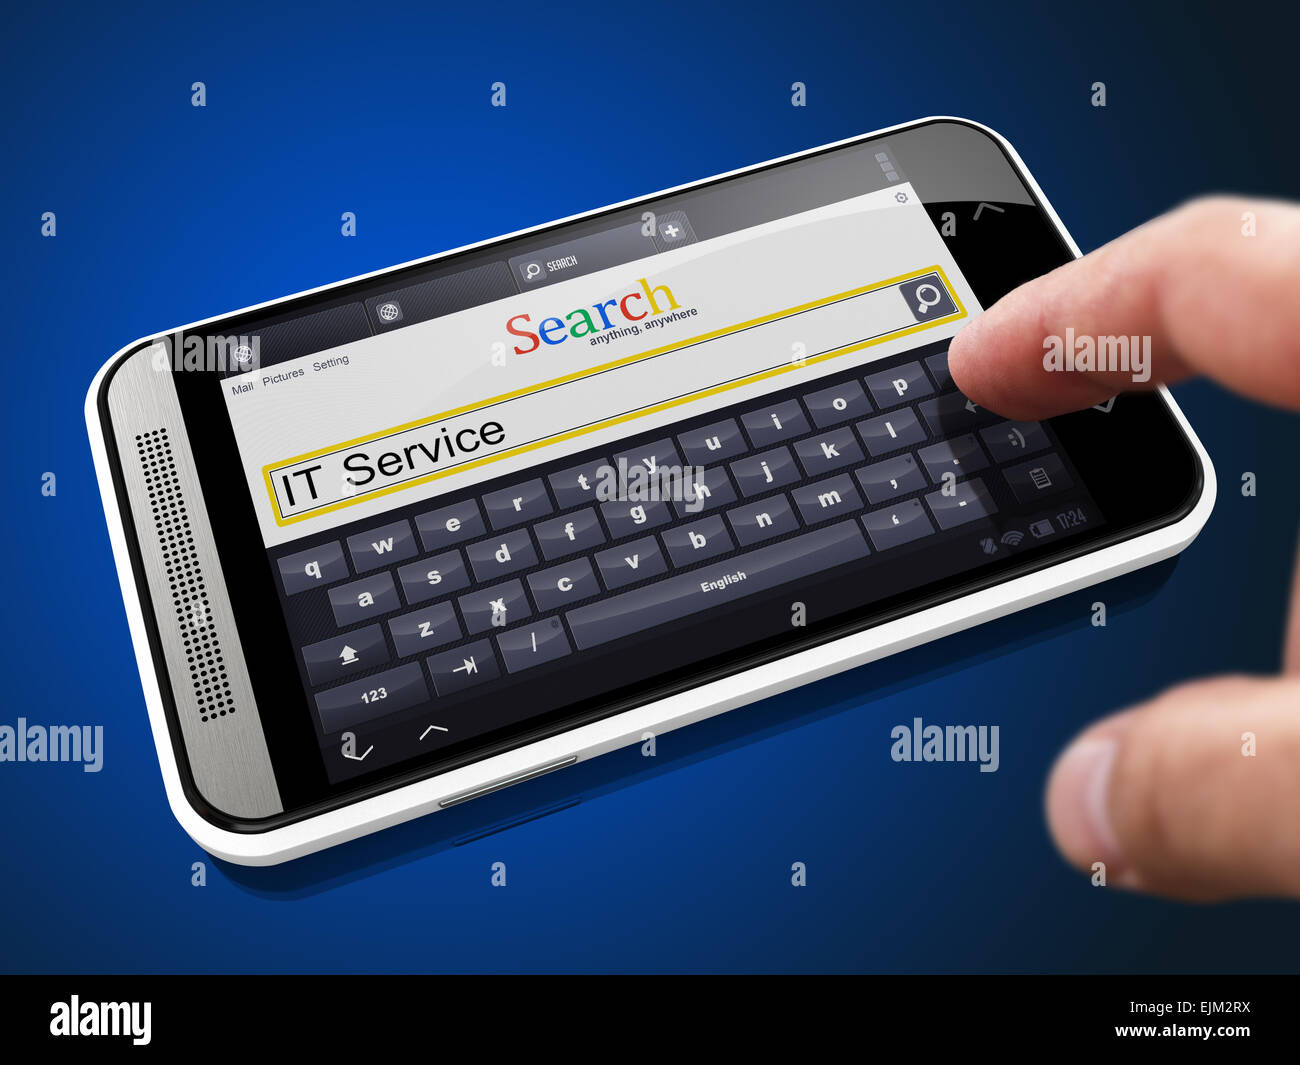 IT Service on the Screen Touch Phone. Stock Photo